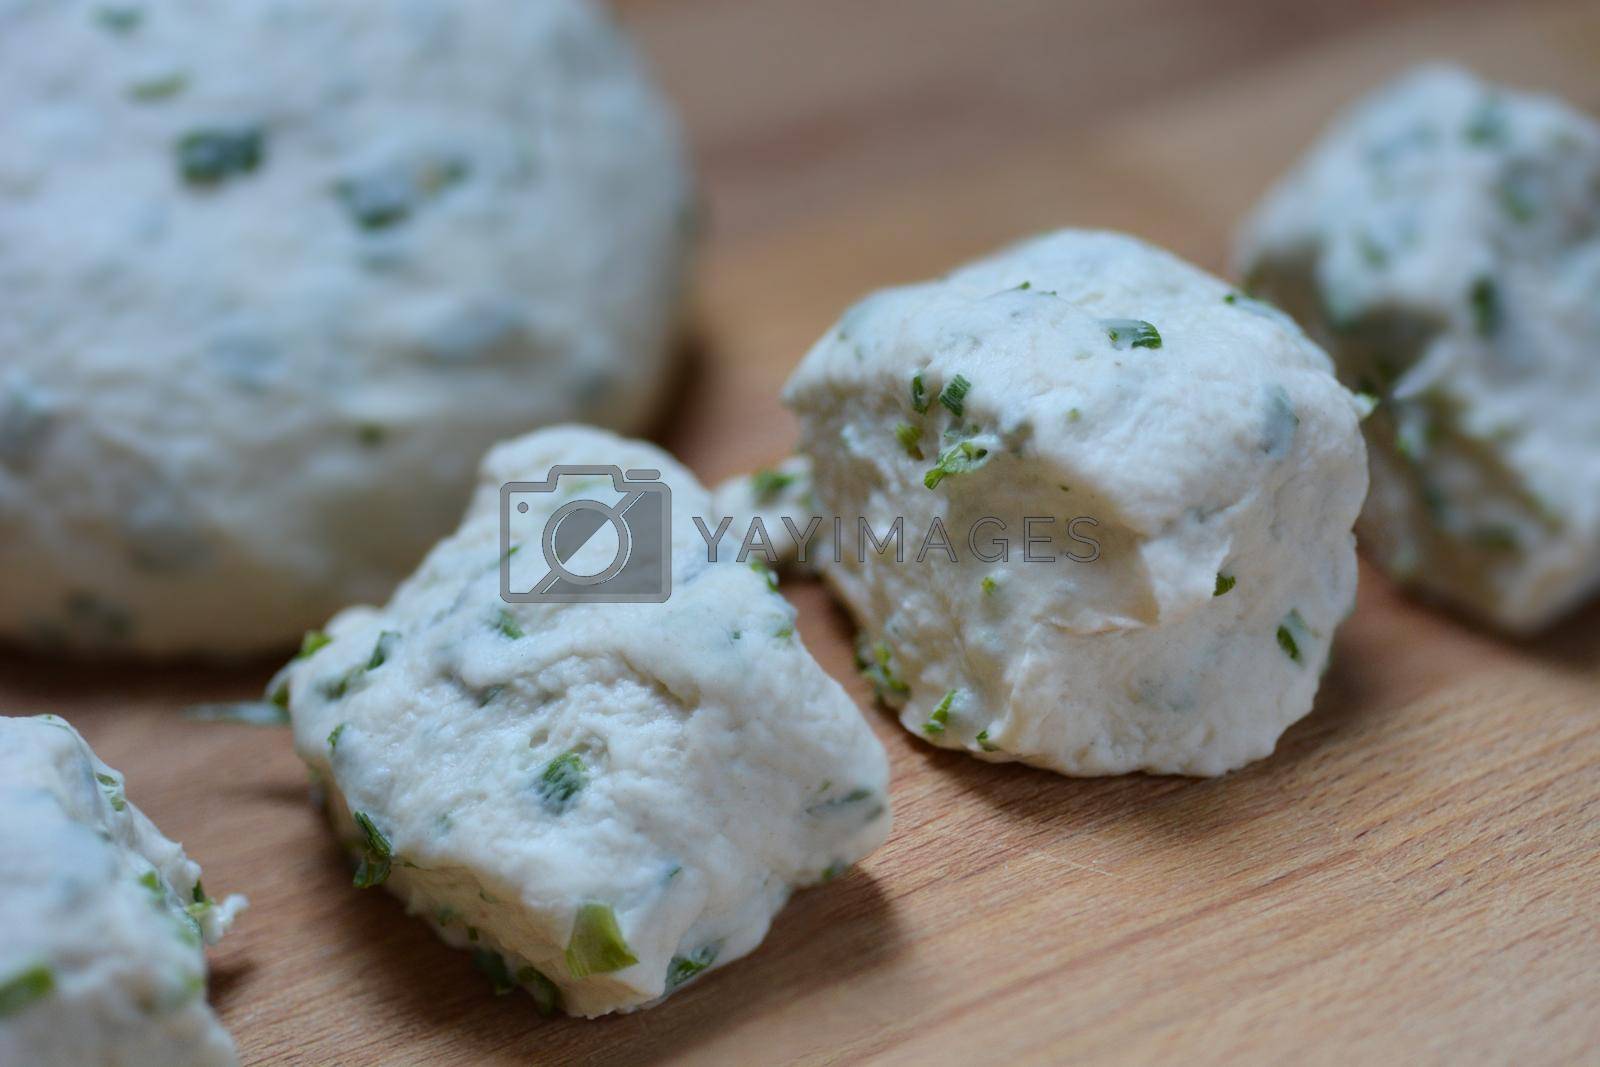 Royalty free image of Raw dough by nahhan